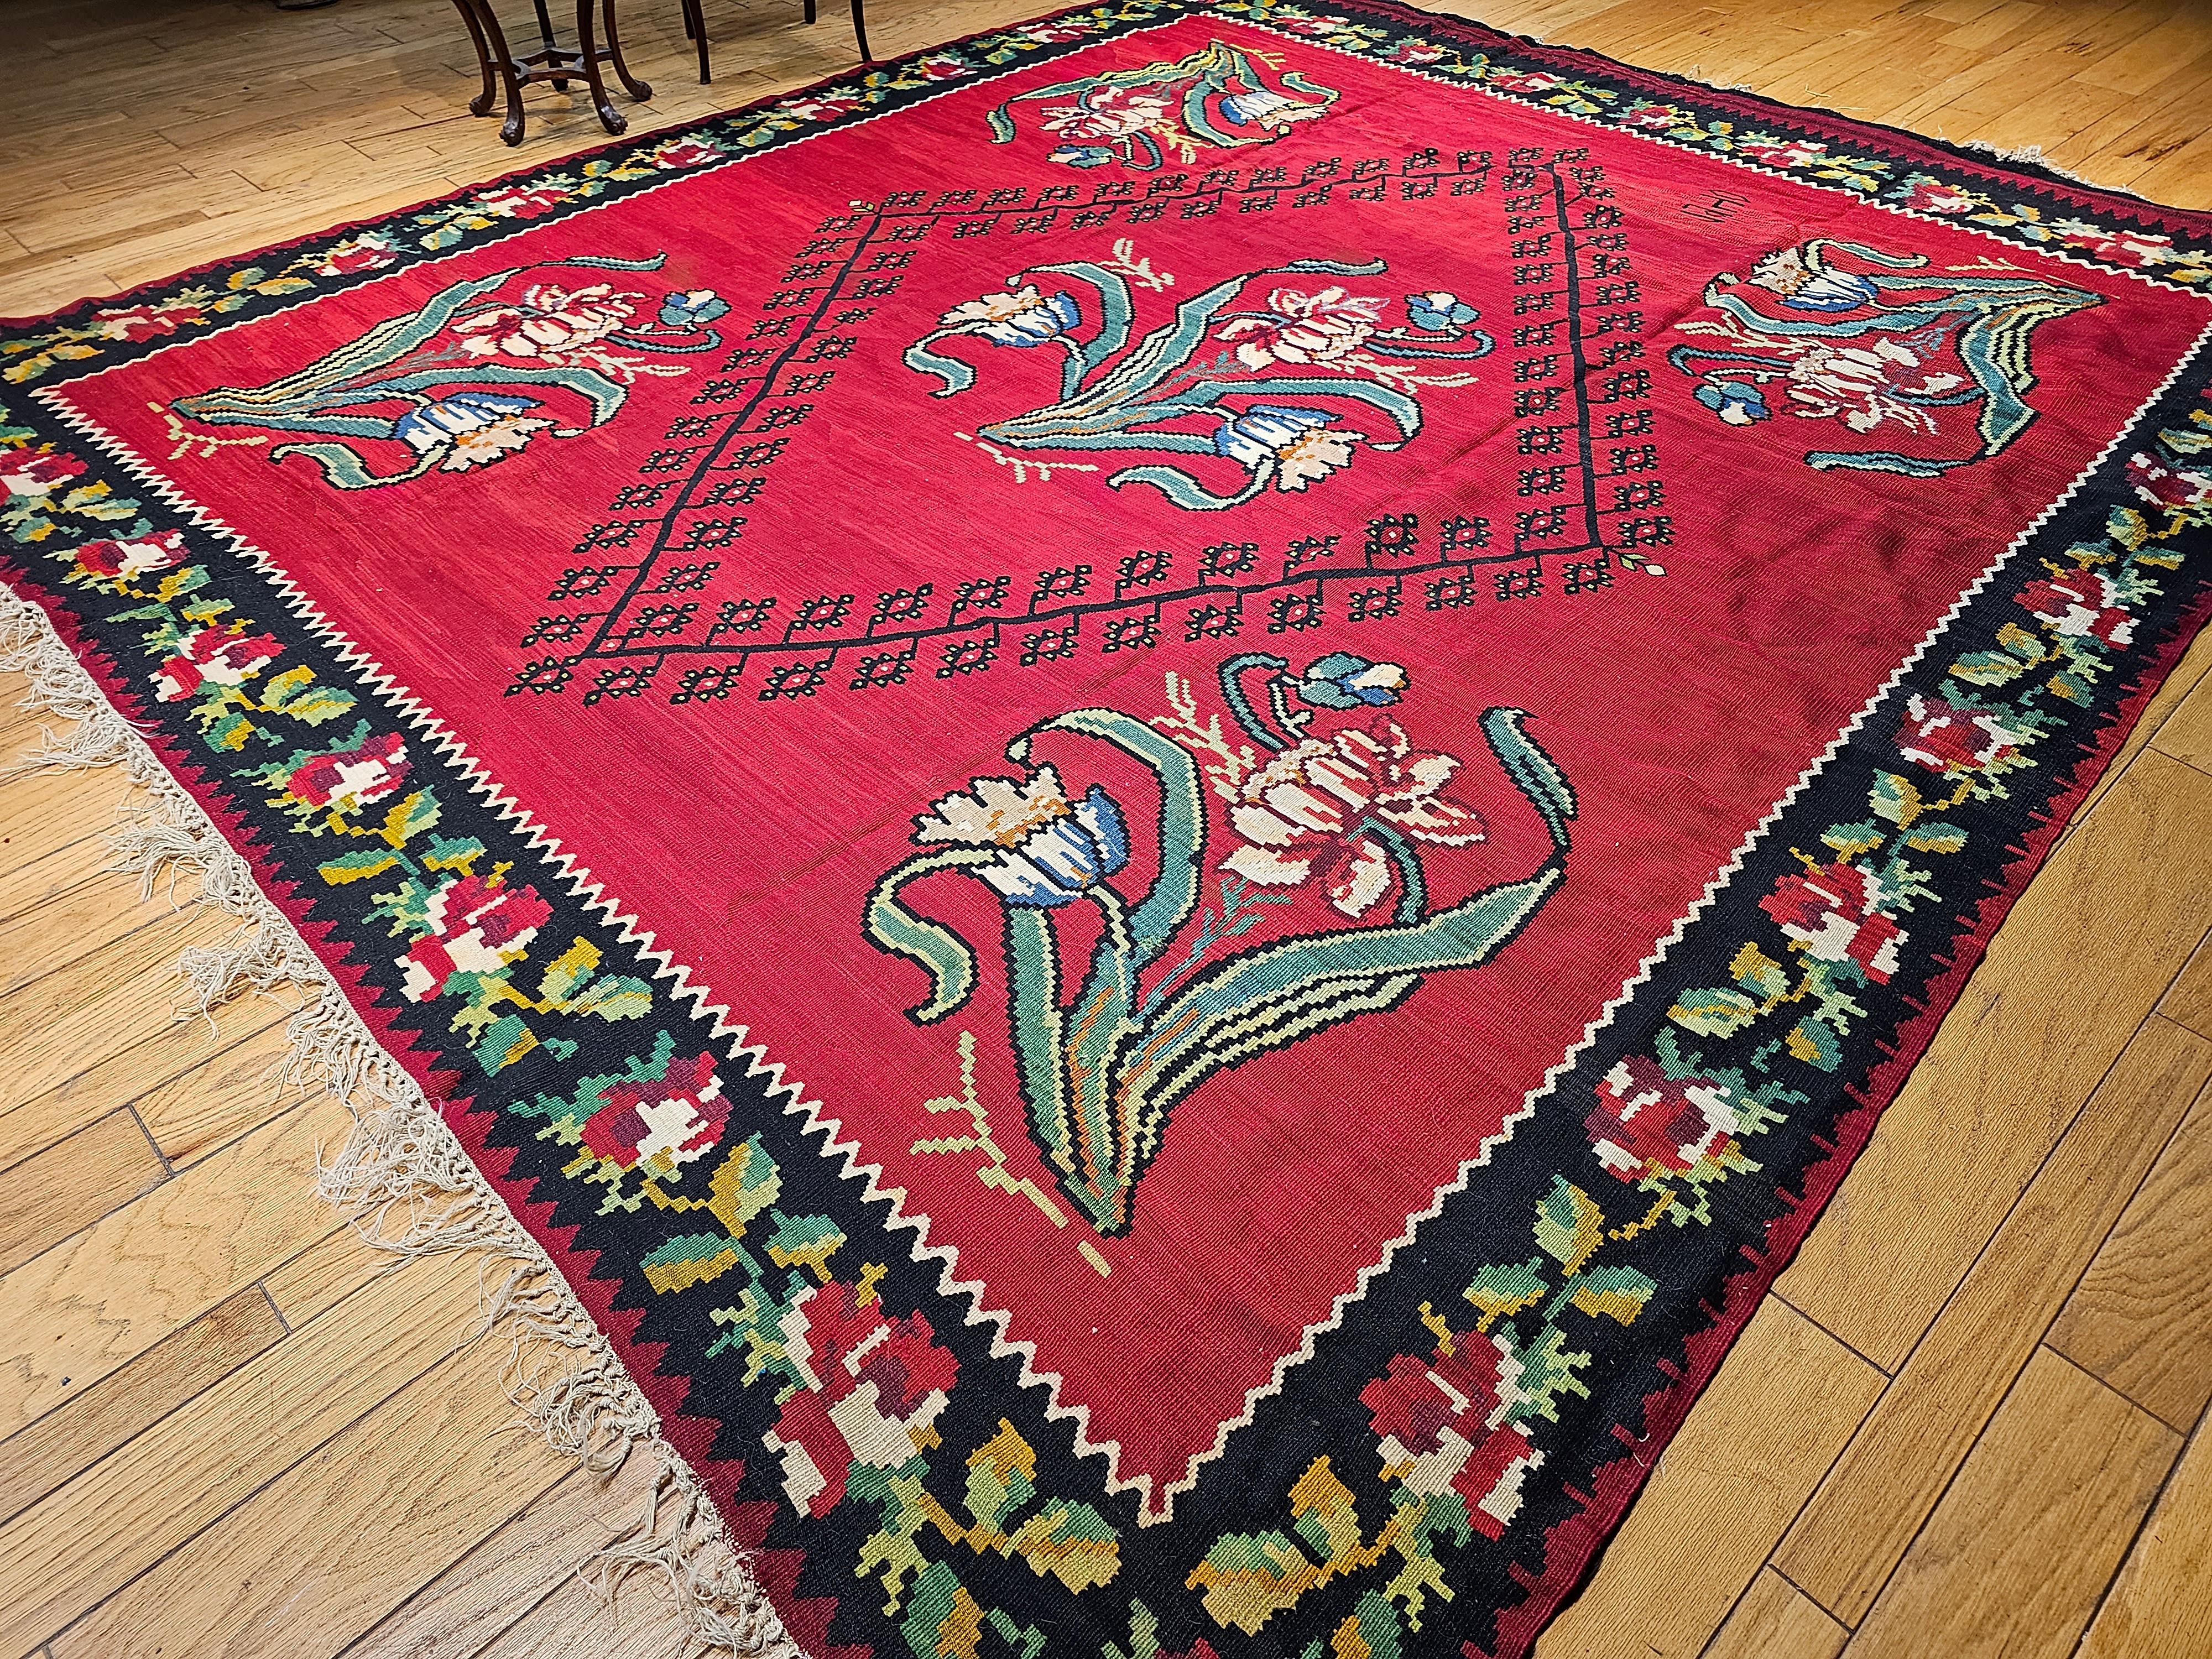 Vintage Bessarabian Kilim with Large Floral Pattern in Red, Black, Green, Blue For Sale 7